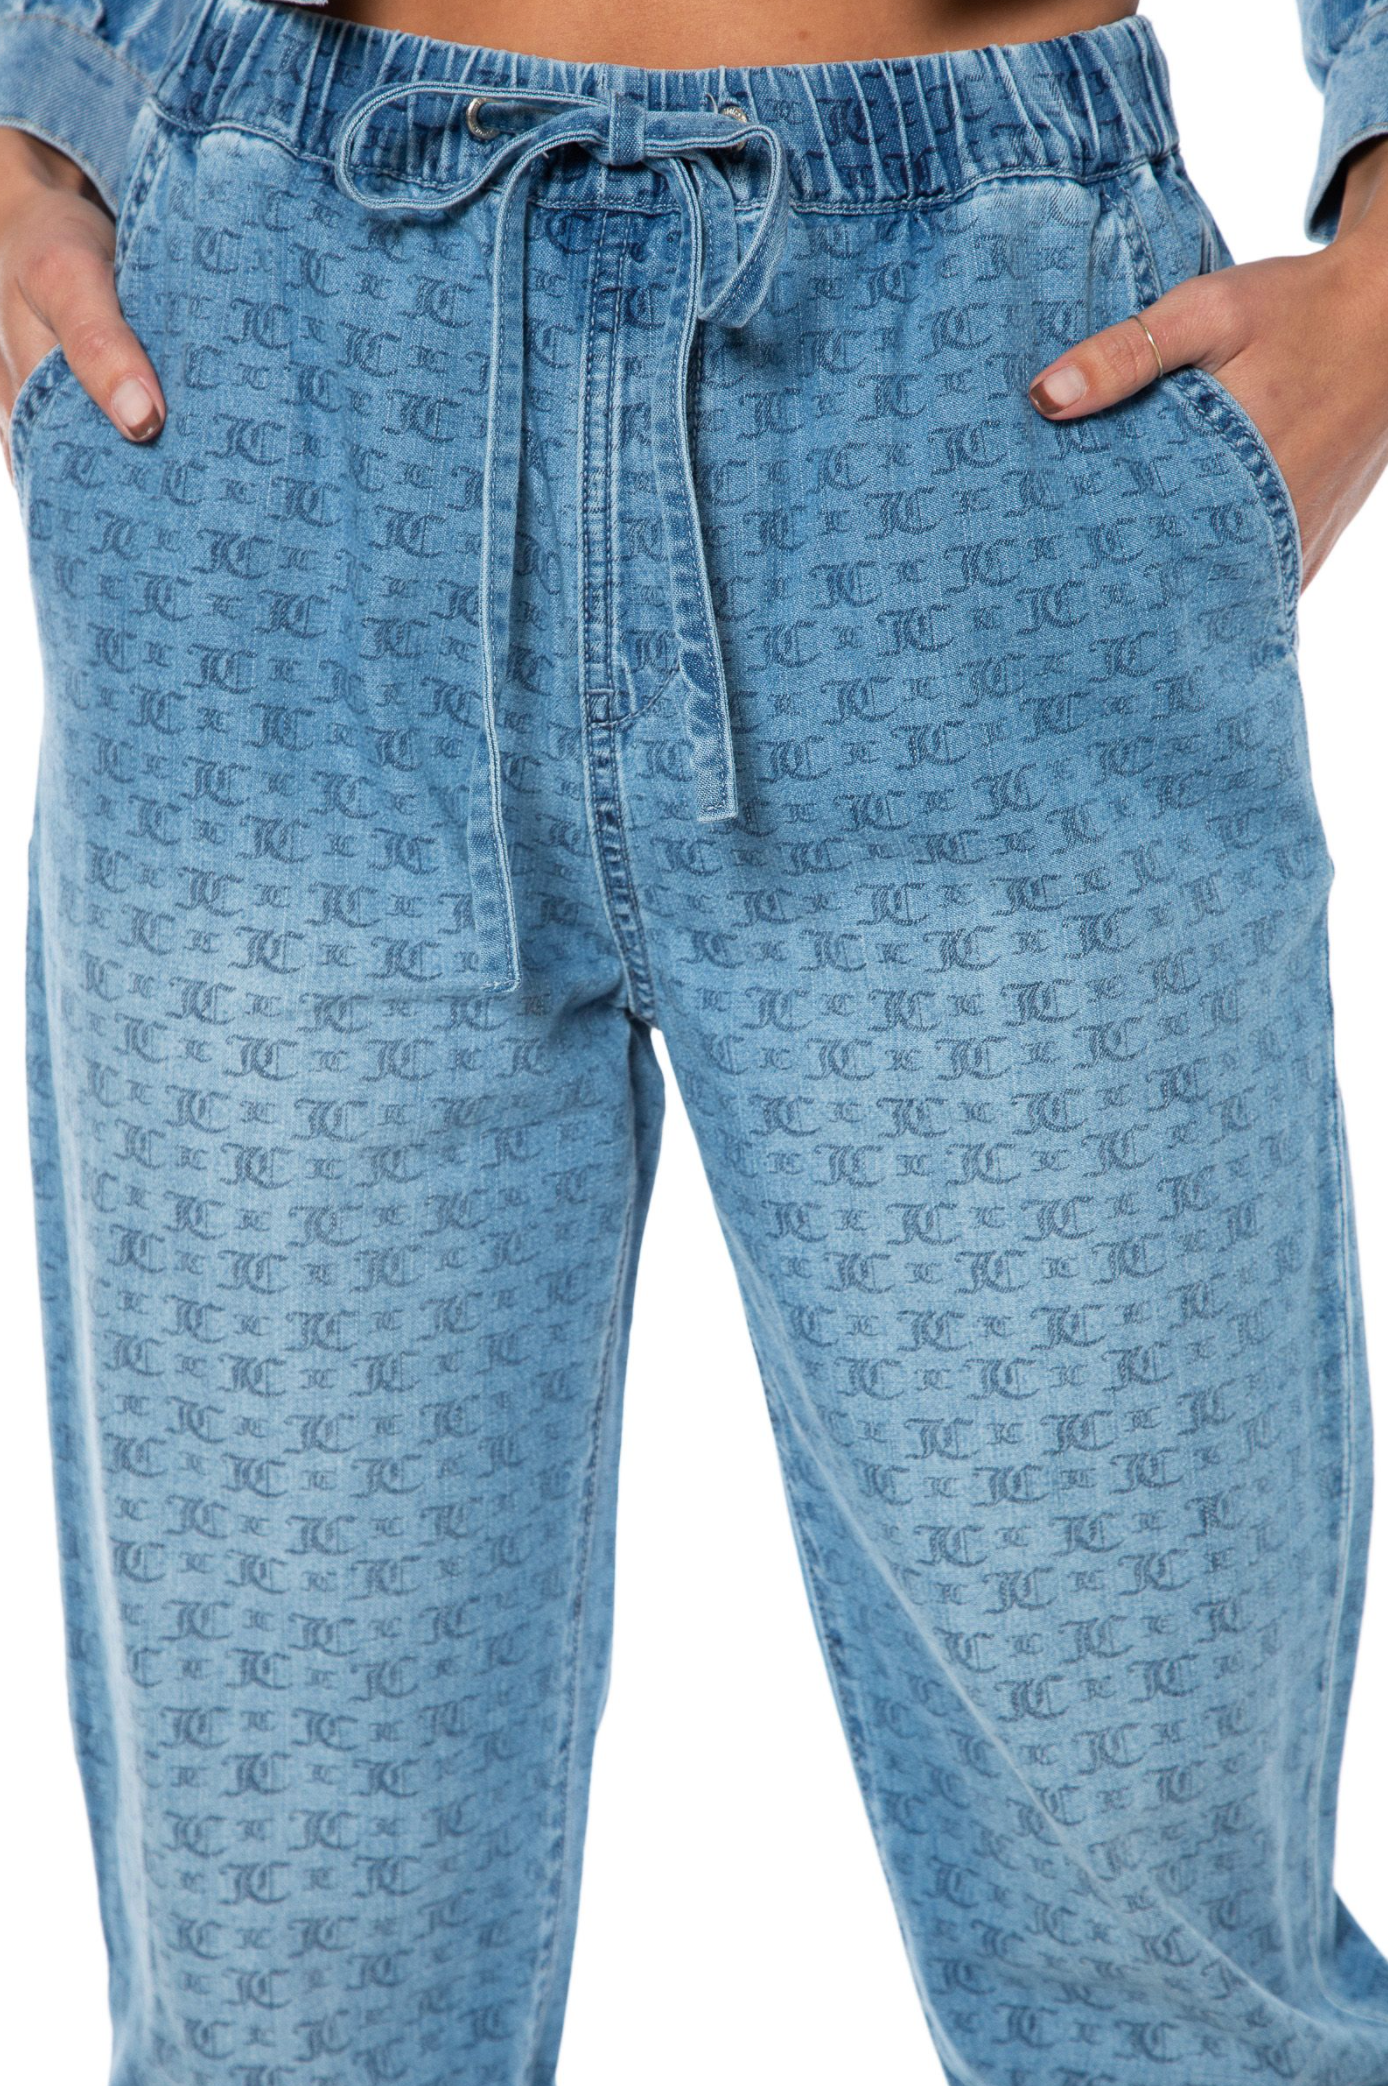 Juicy Couture JC Printed Jogger